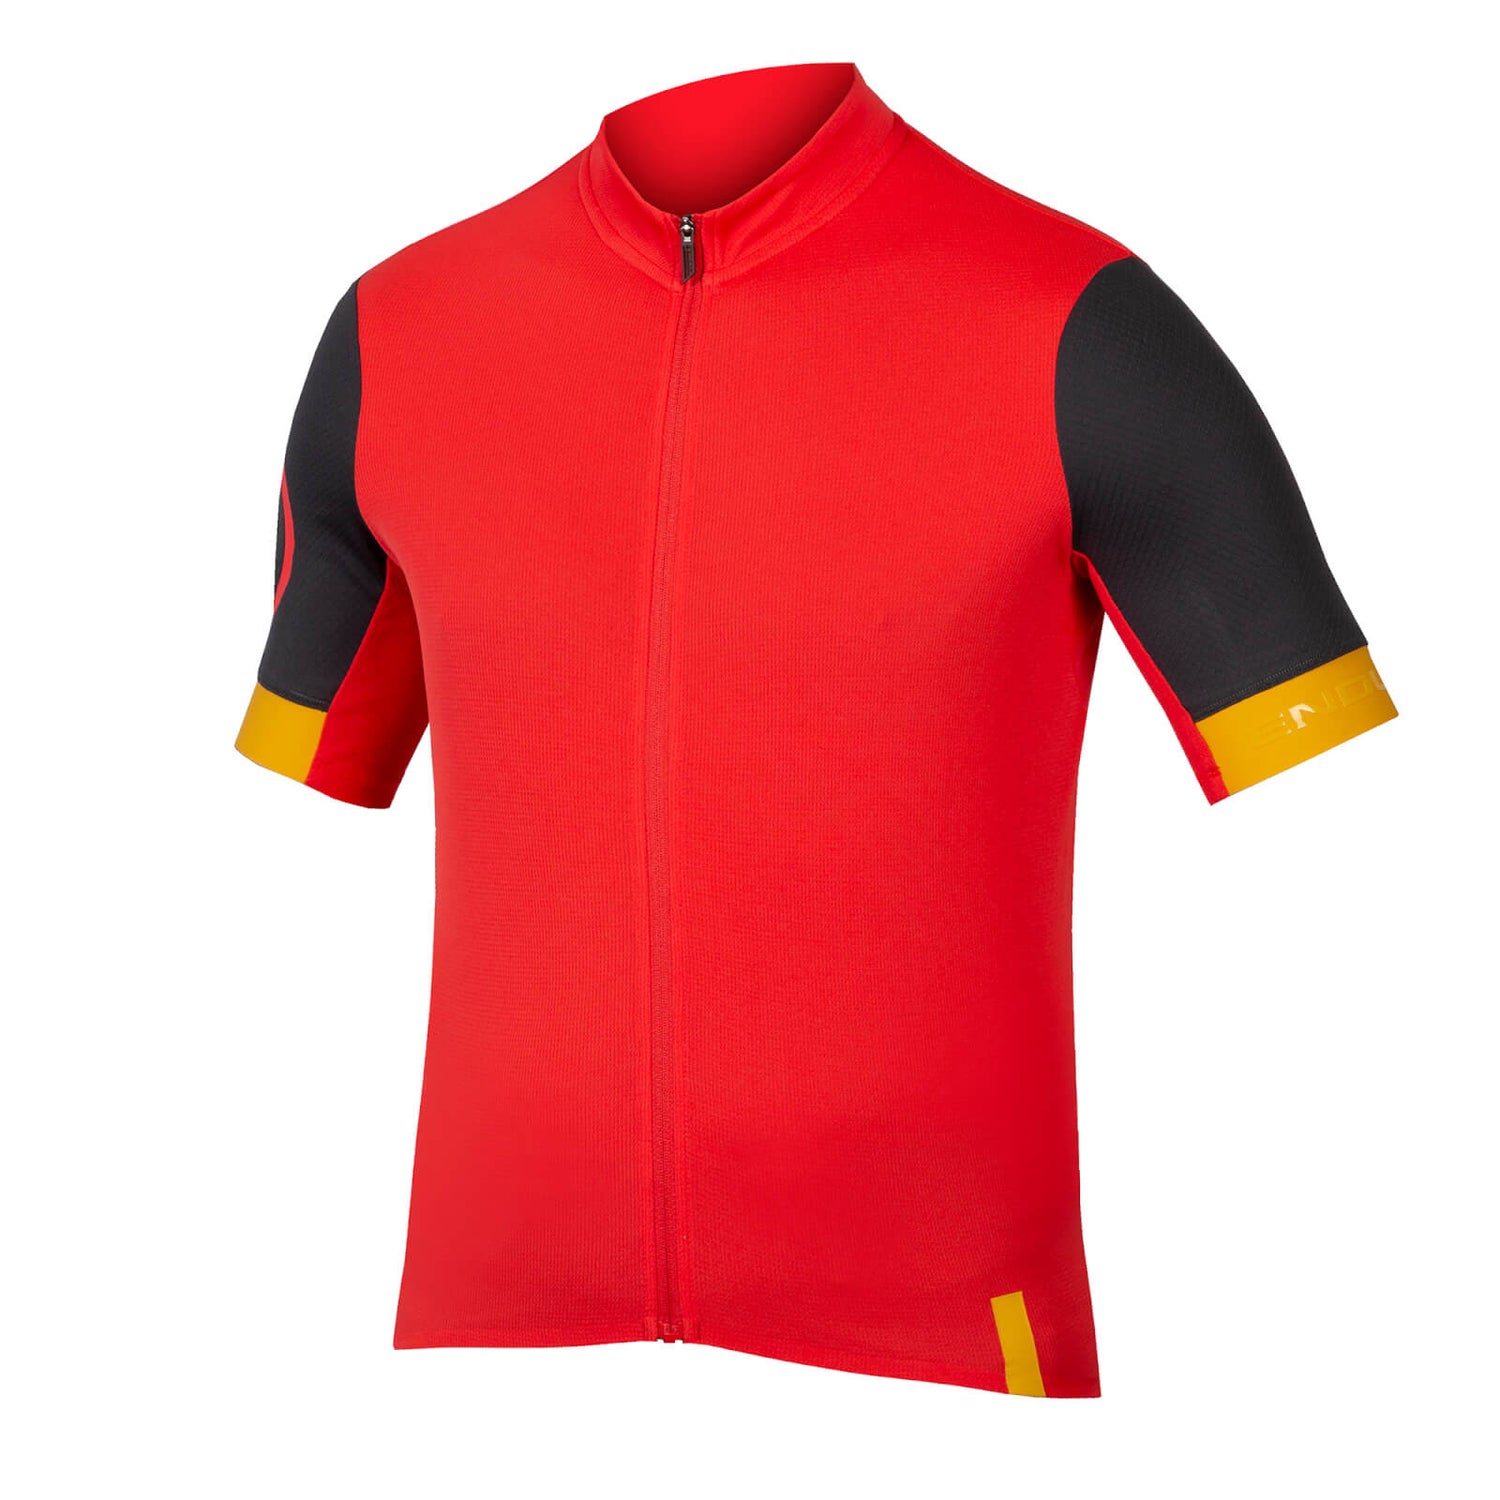 Men's FS260 S/S Jersey - Pomegranate - XXL (Relaxed Fit)